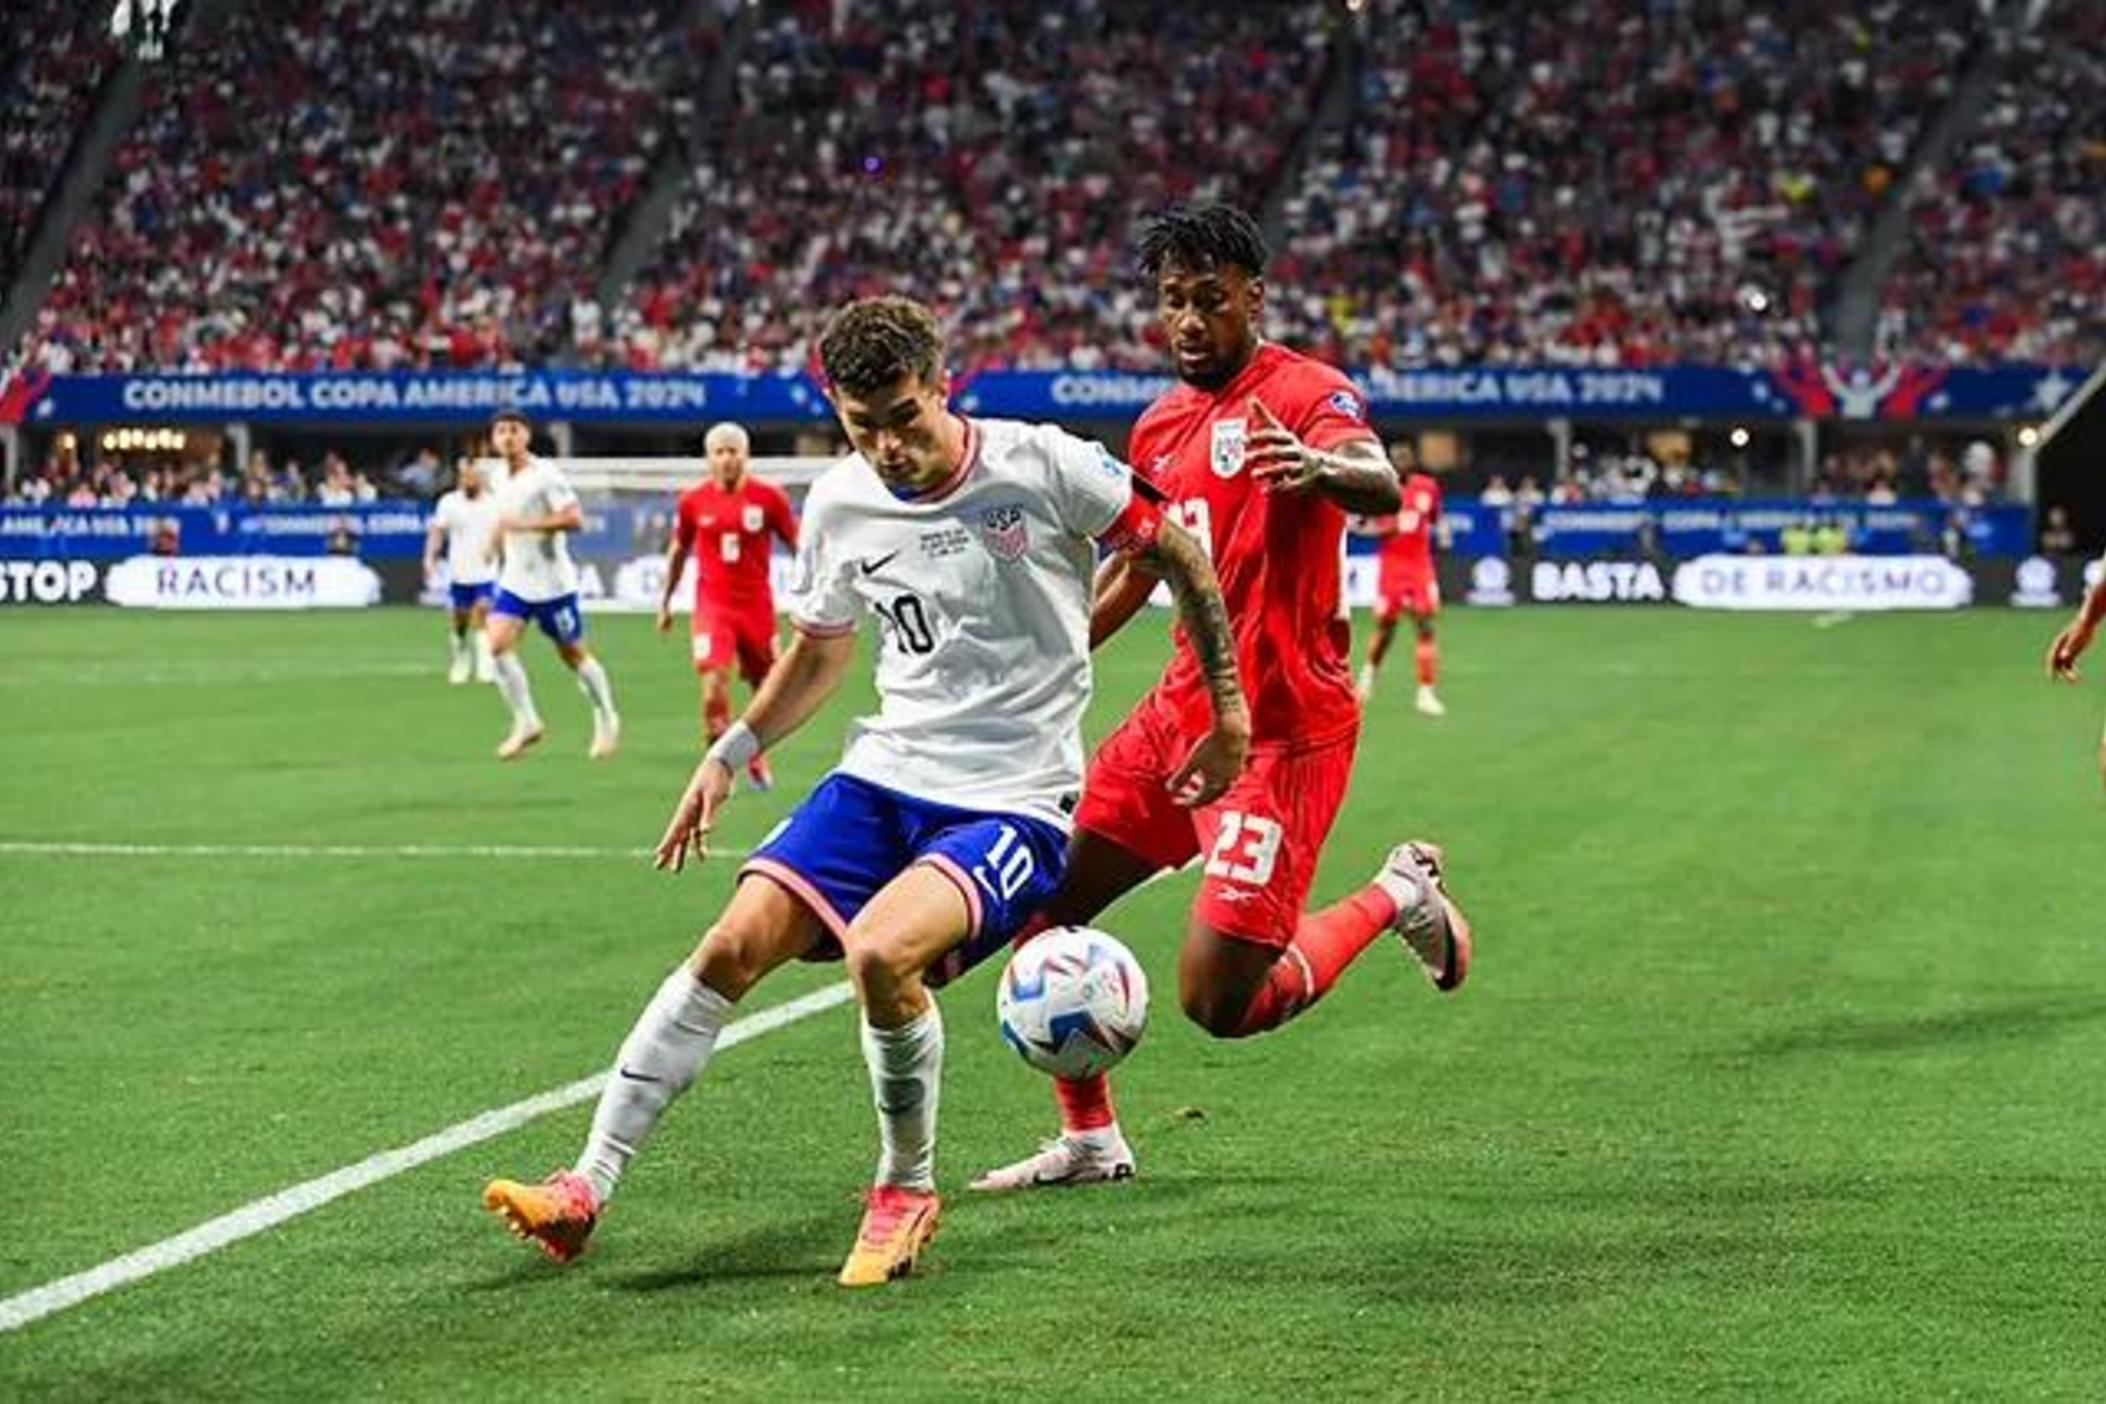 U.S. Men's National Team captain Christian Pulisic (center) pursues the ball with Panama's  Michael Murillo right behind him at the June 27 Copa America match at Atlanta's Mercedes-Benz Stadium.